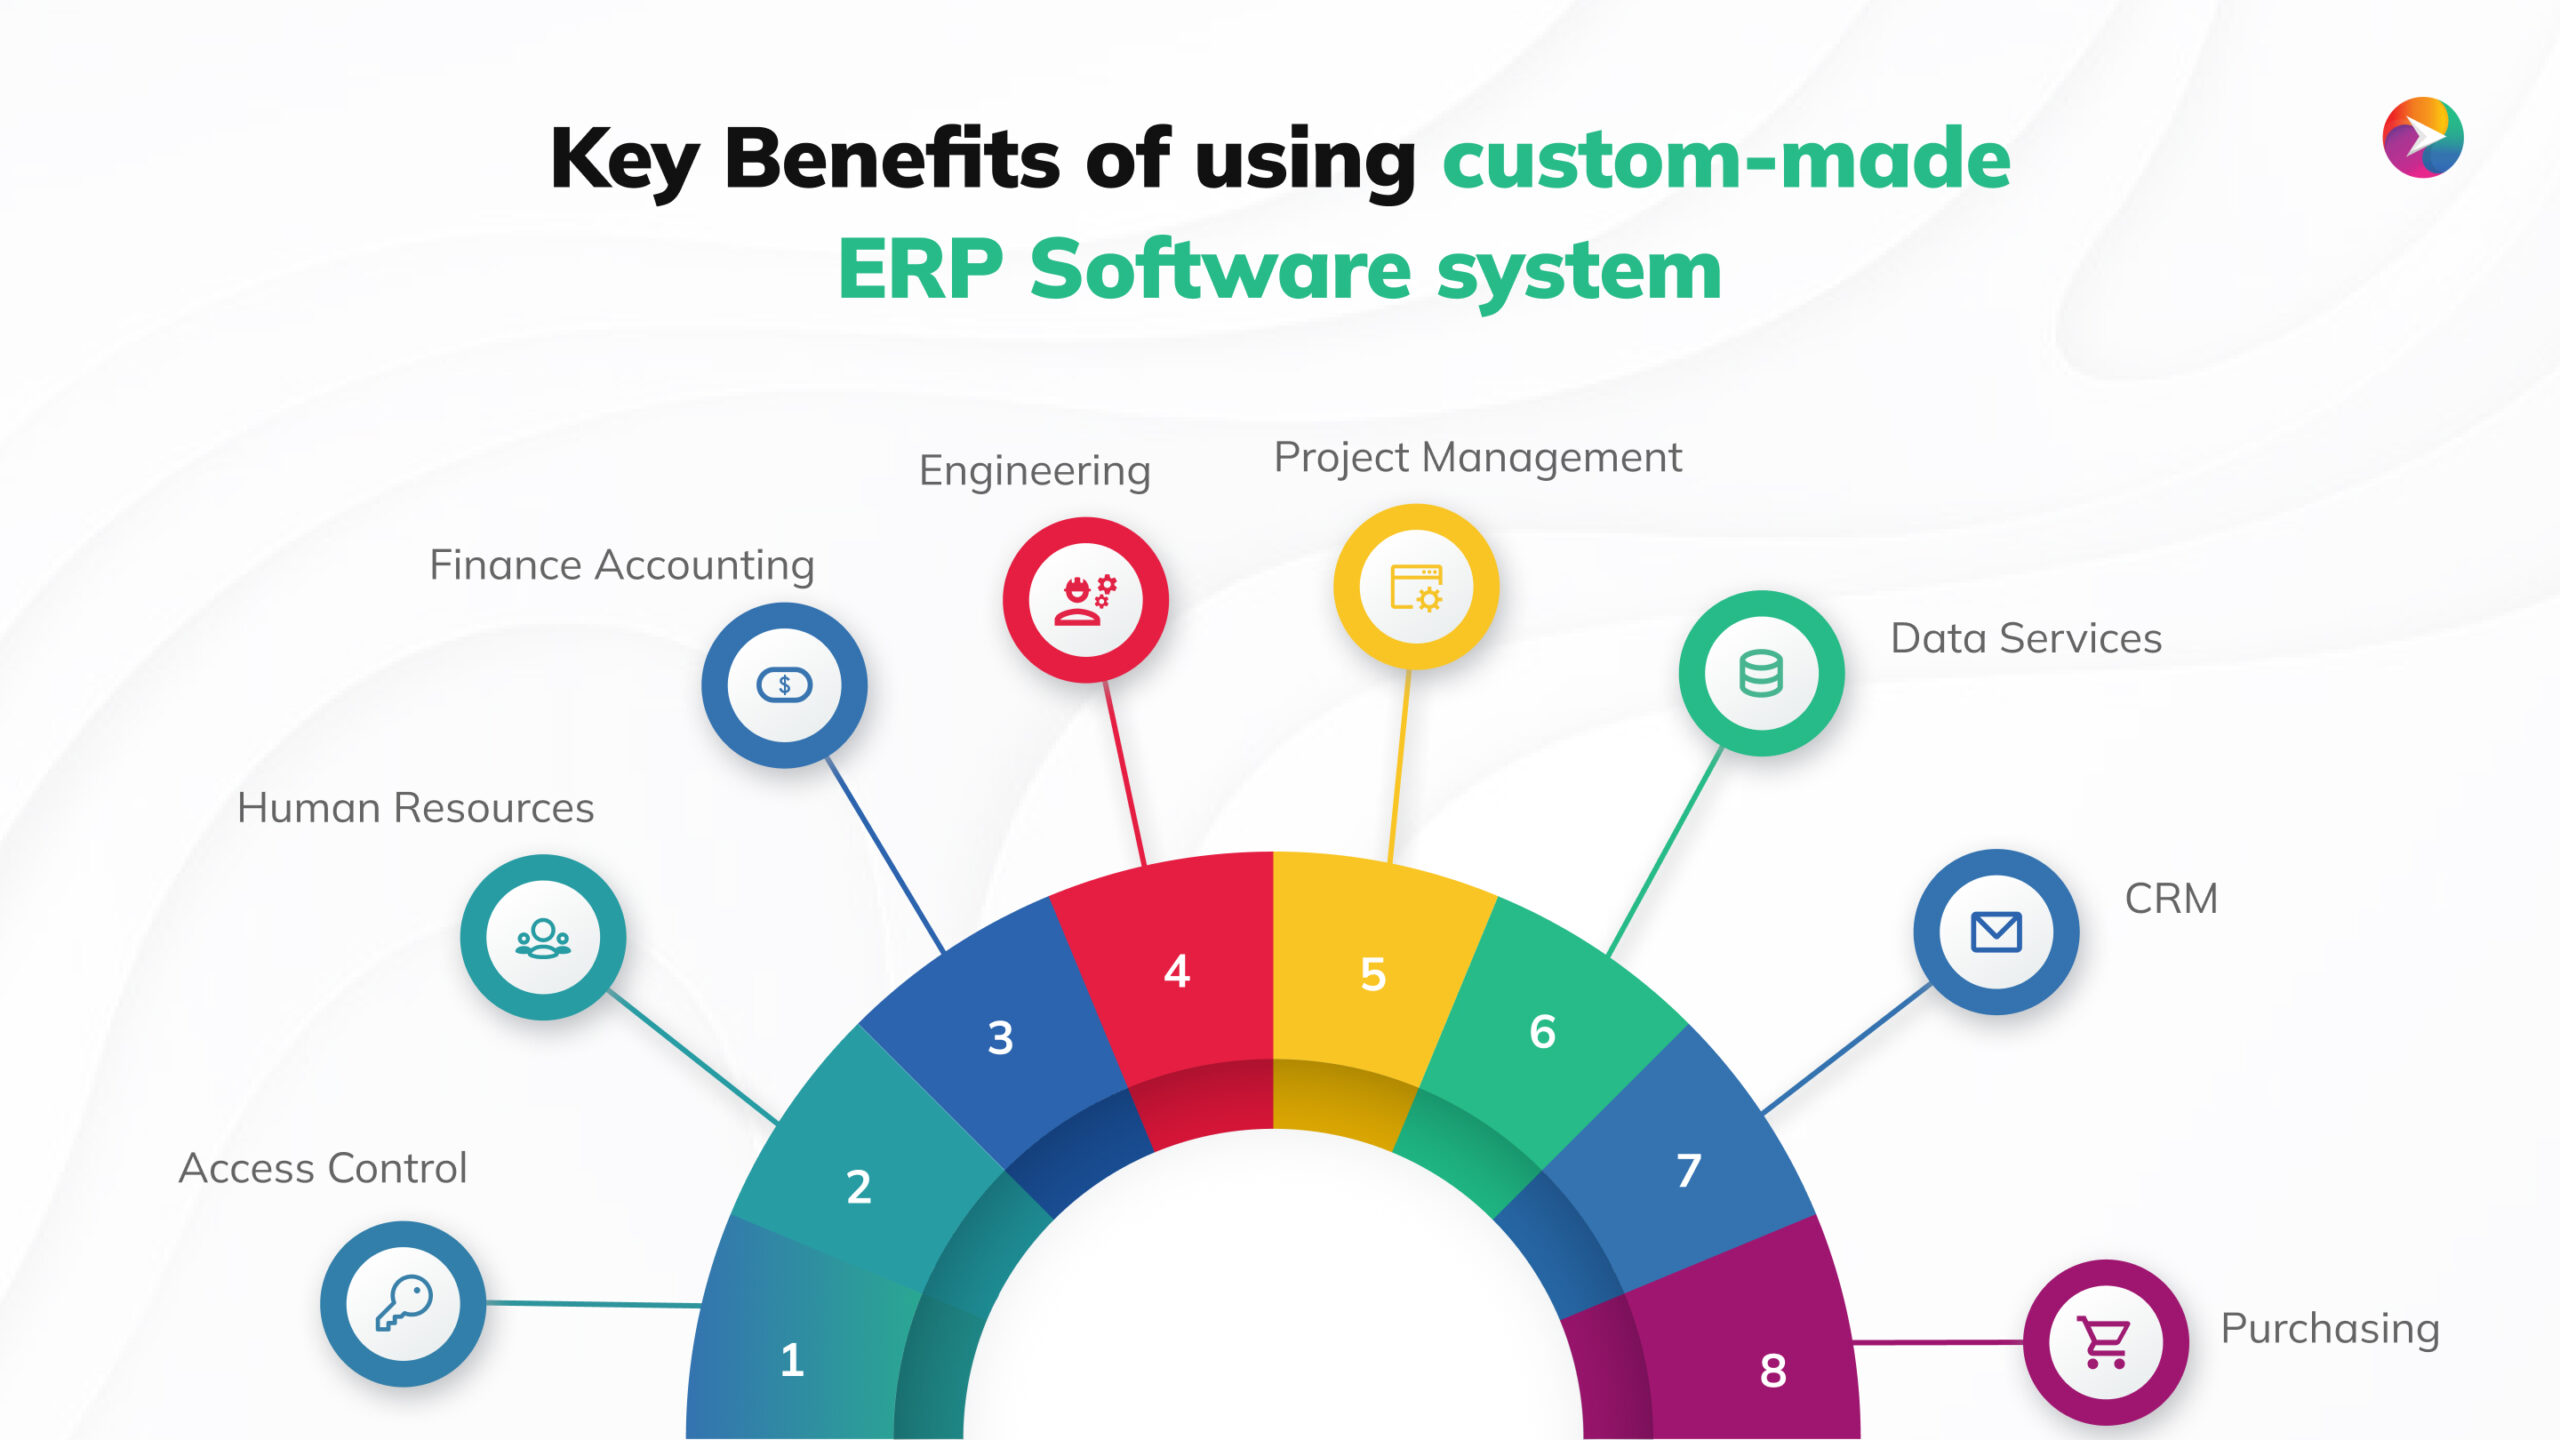 This image contains the heading "Key Benefits of using custom-made ERP Software system" and below it, there is a diagram containing all the benefits of the ERP system. 